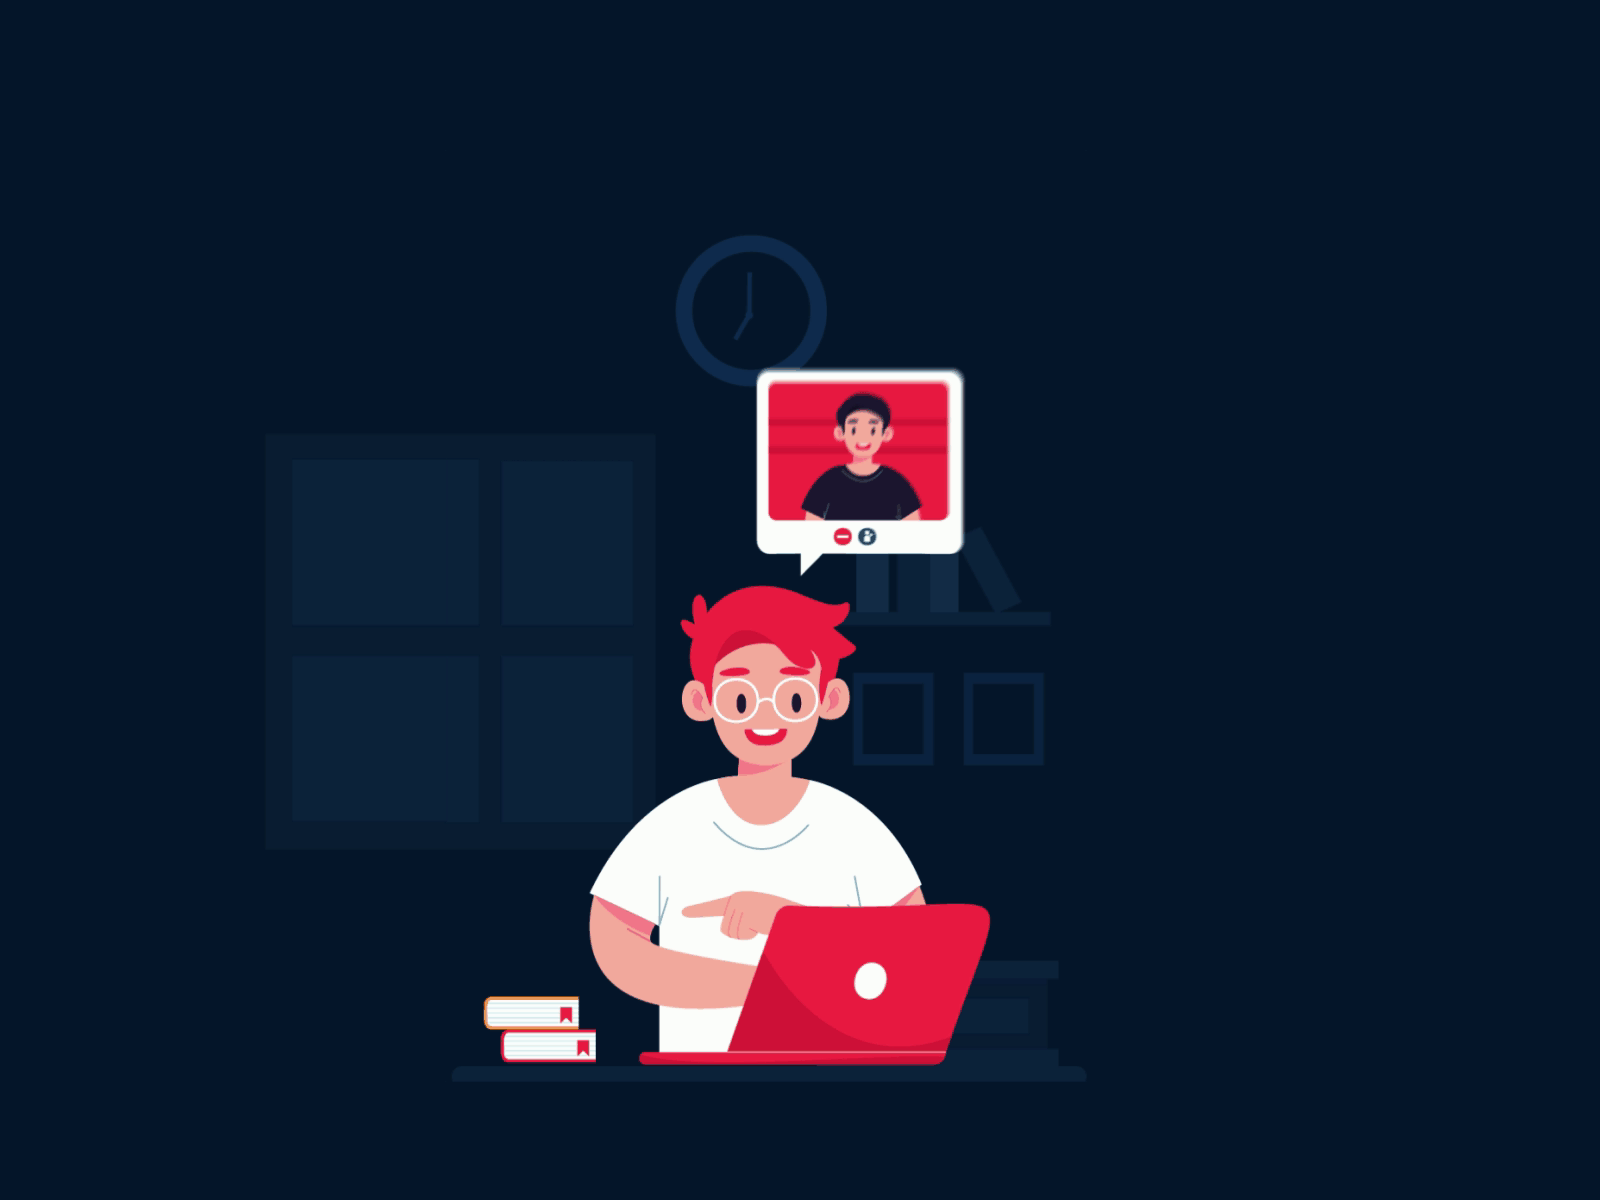 group study animation by Mozammel on Dribbble